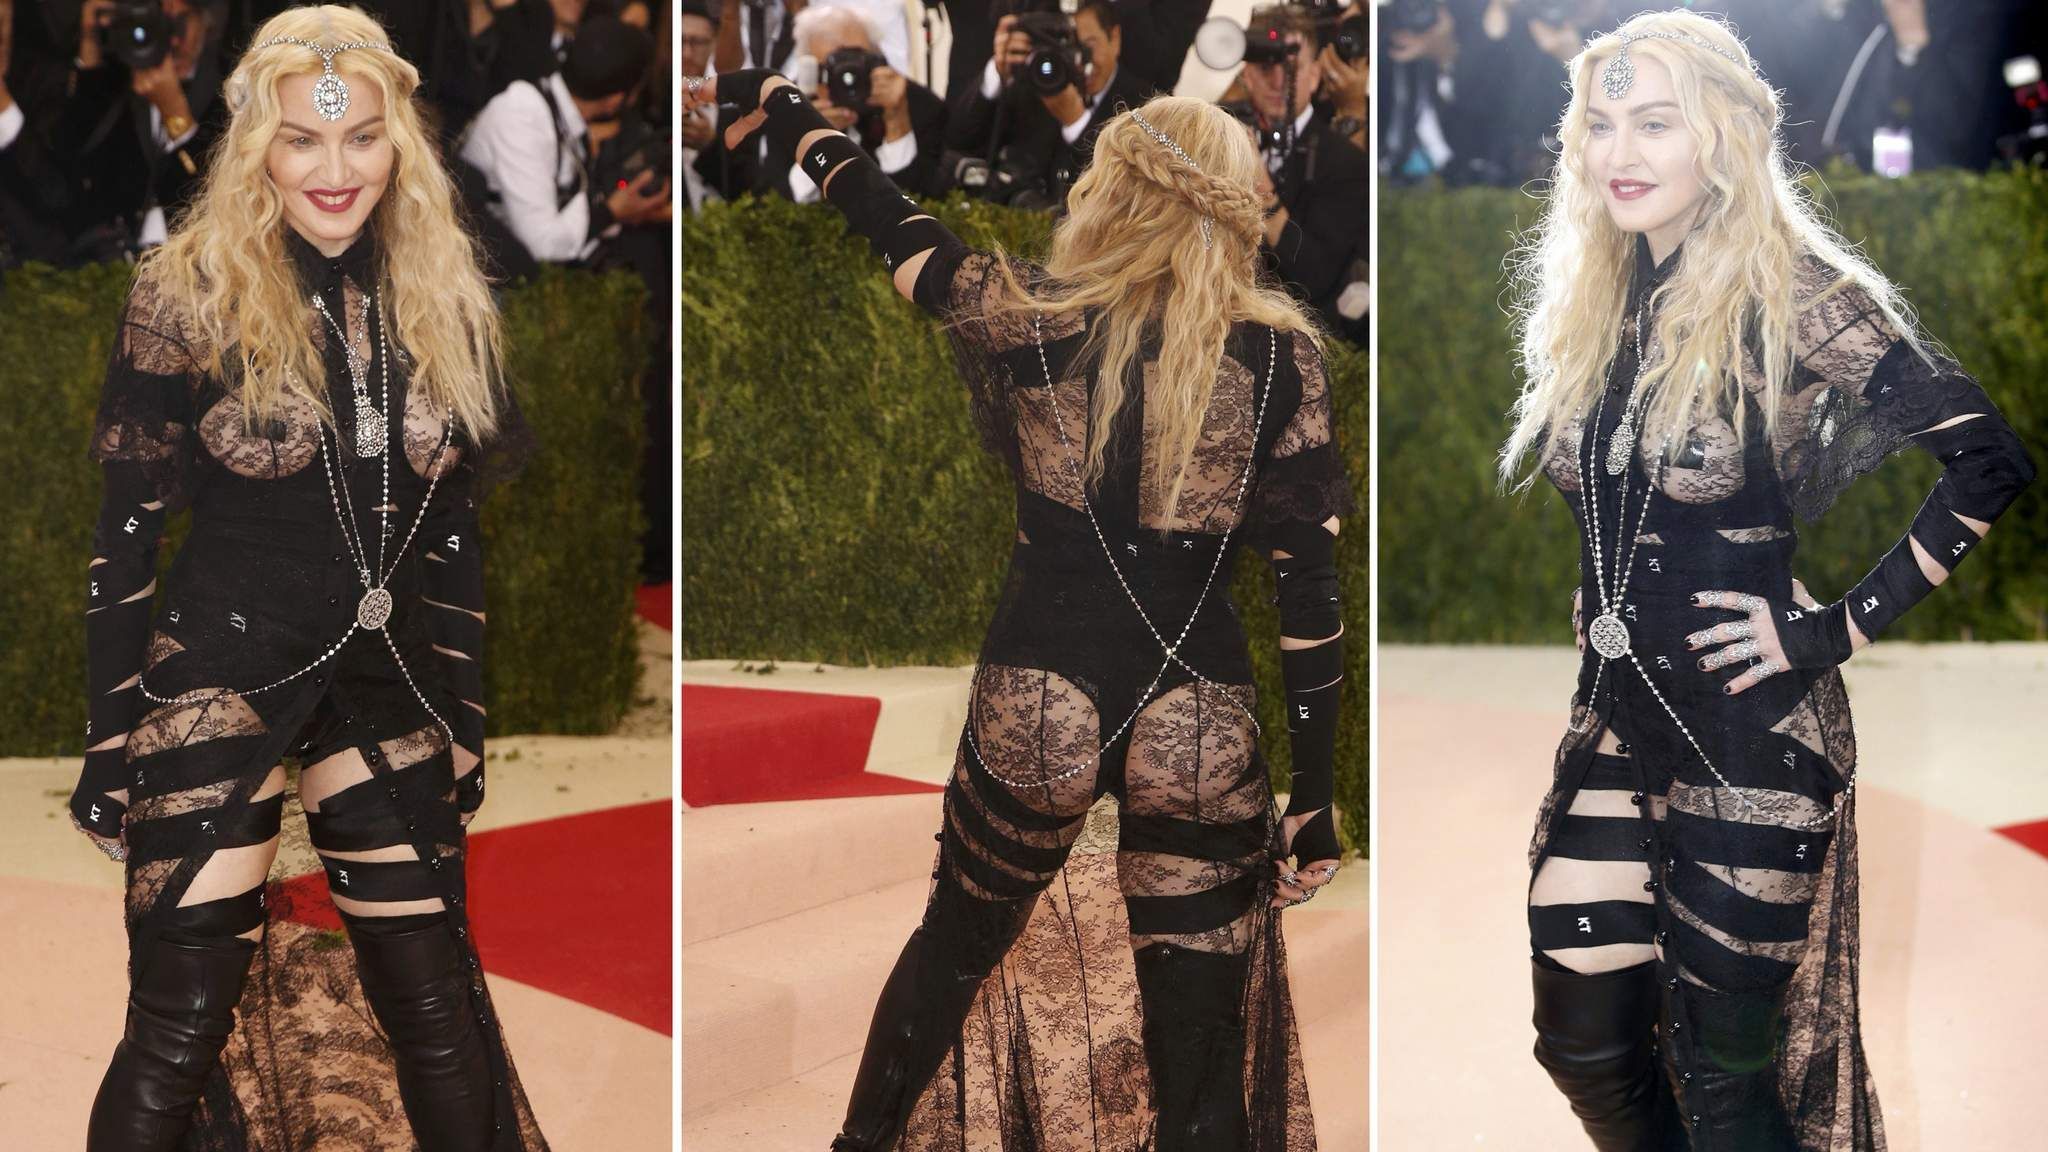 Madonna Claims Her Risqué Met Gala Outfit Was “a Political Statement”